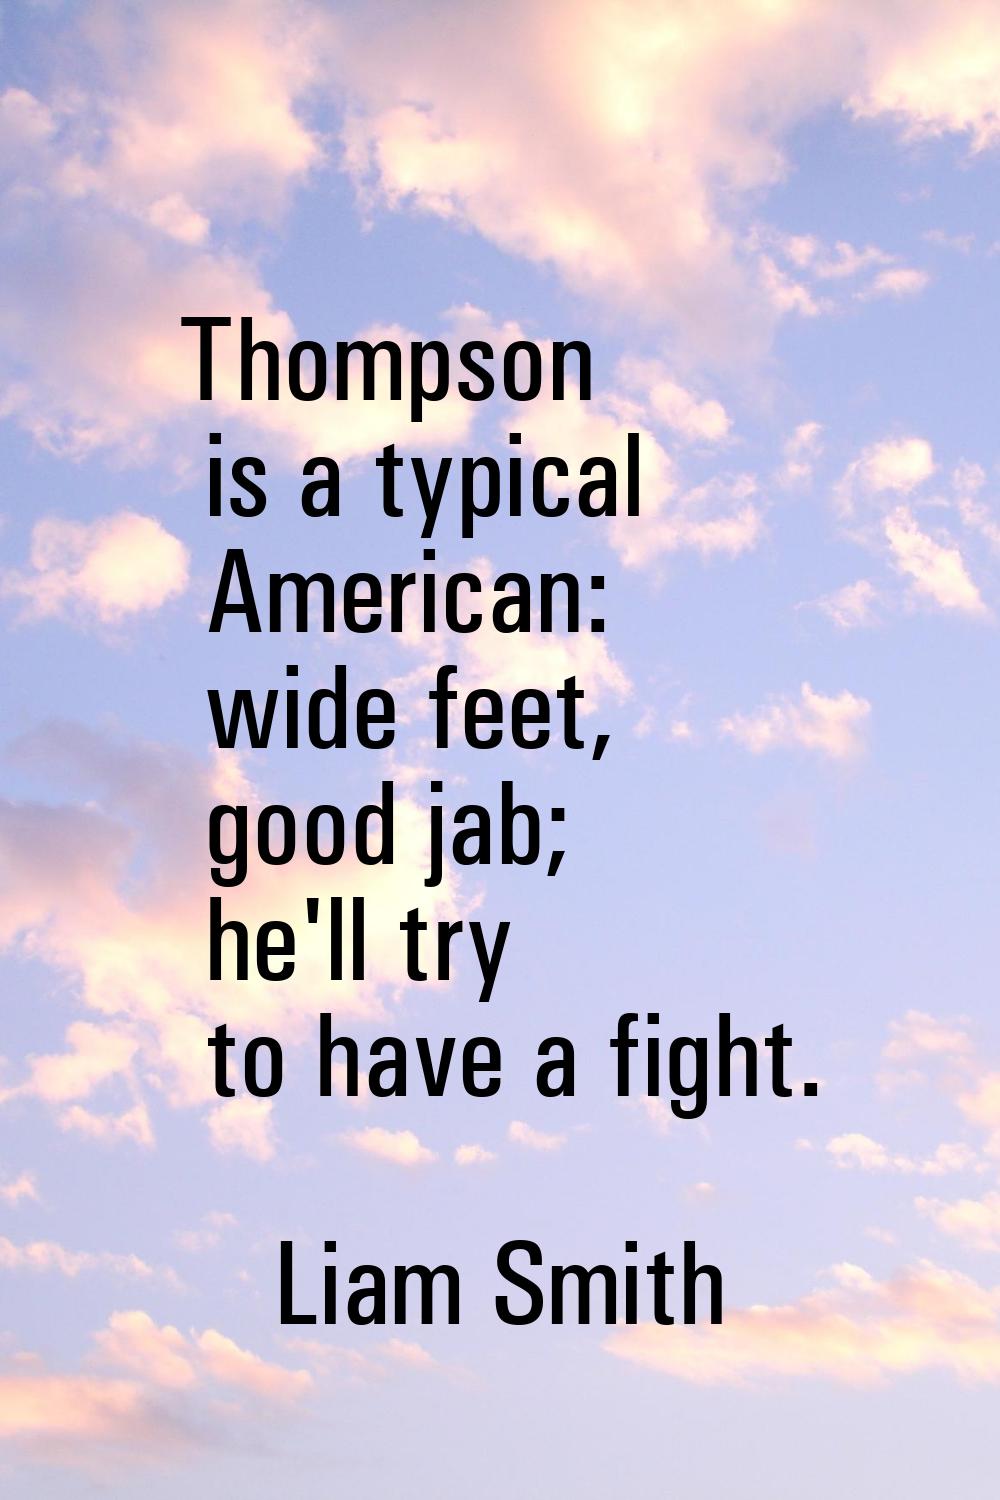 Thompson is a typical American: wide feet, good jab; he'll try to have a fight.